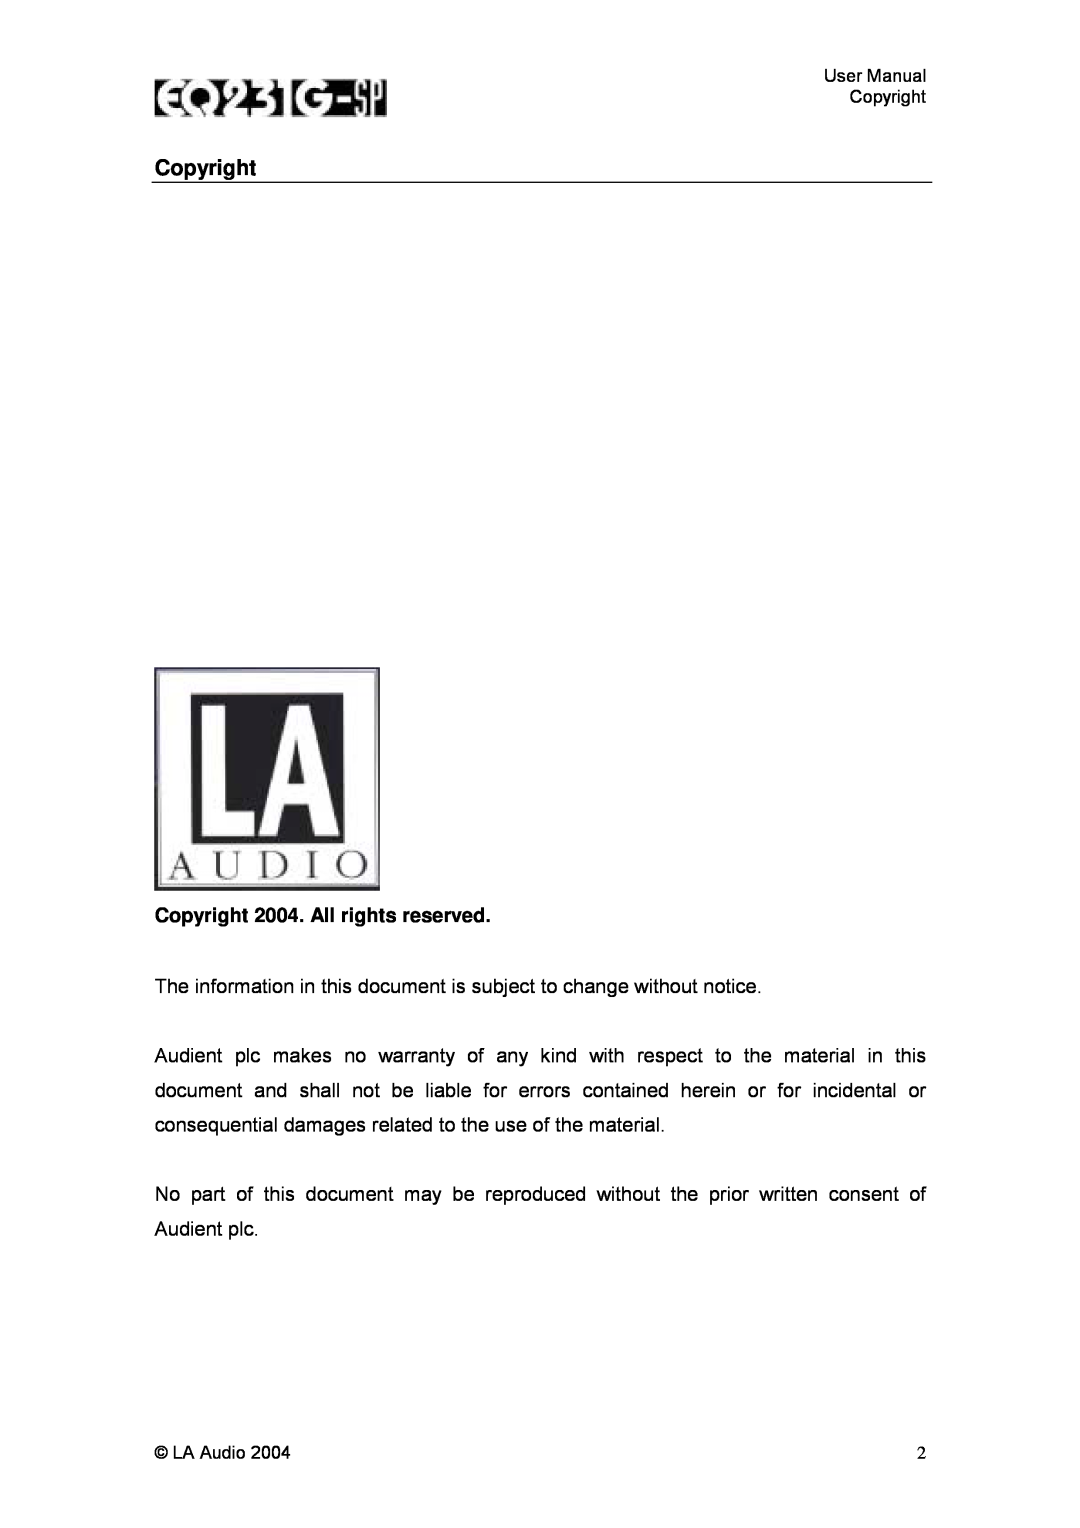 LA Audio Electronic EQ231G-SP user manual Copyright 2004. All rights reserved 